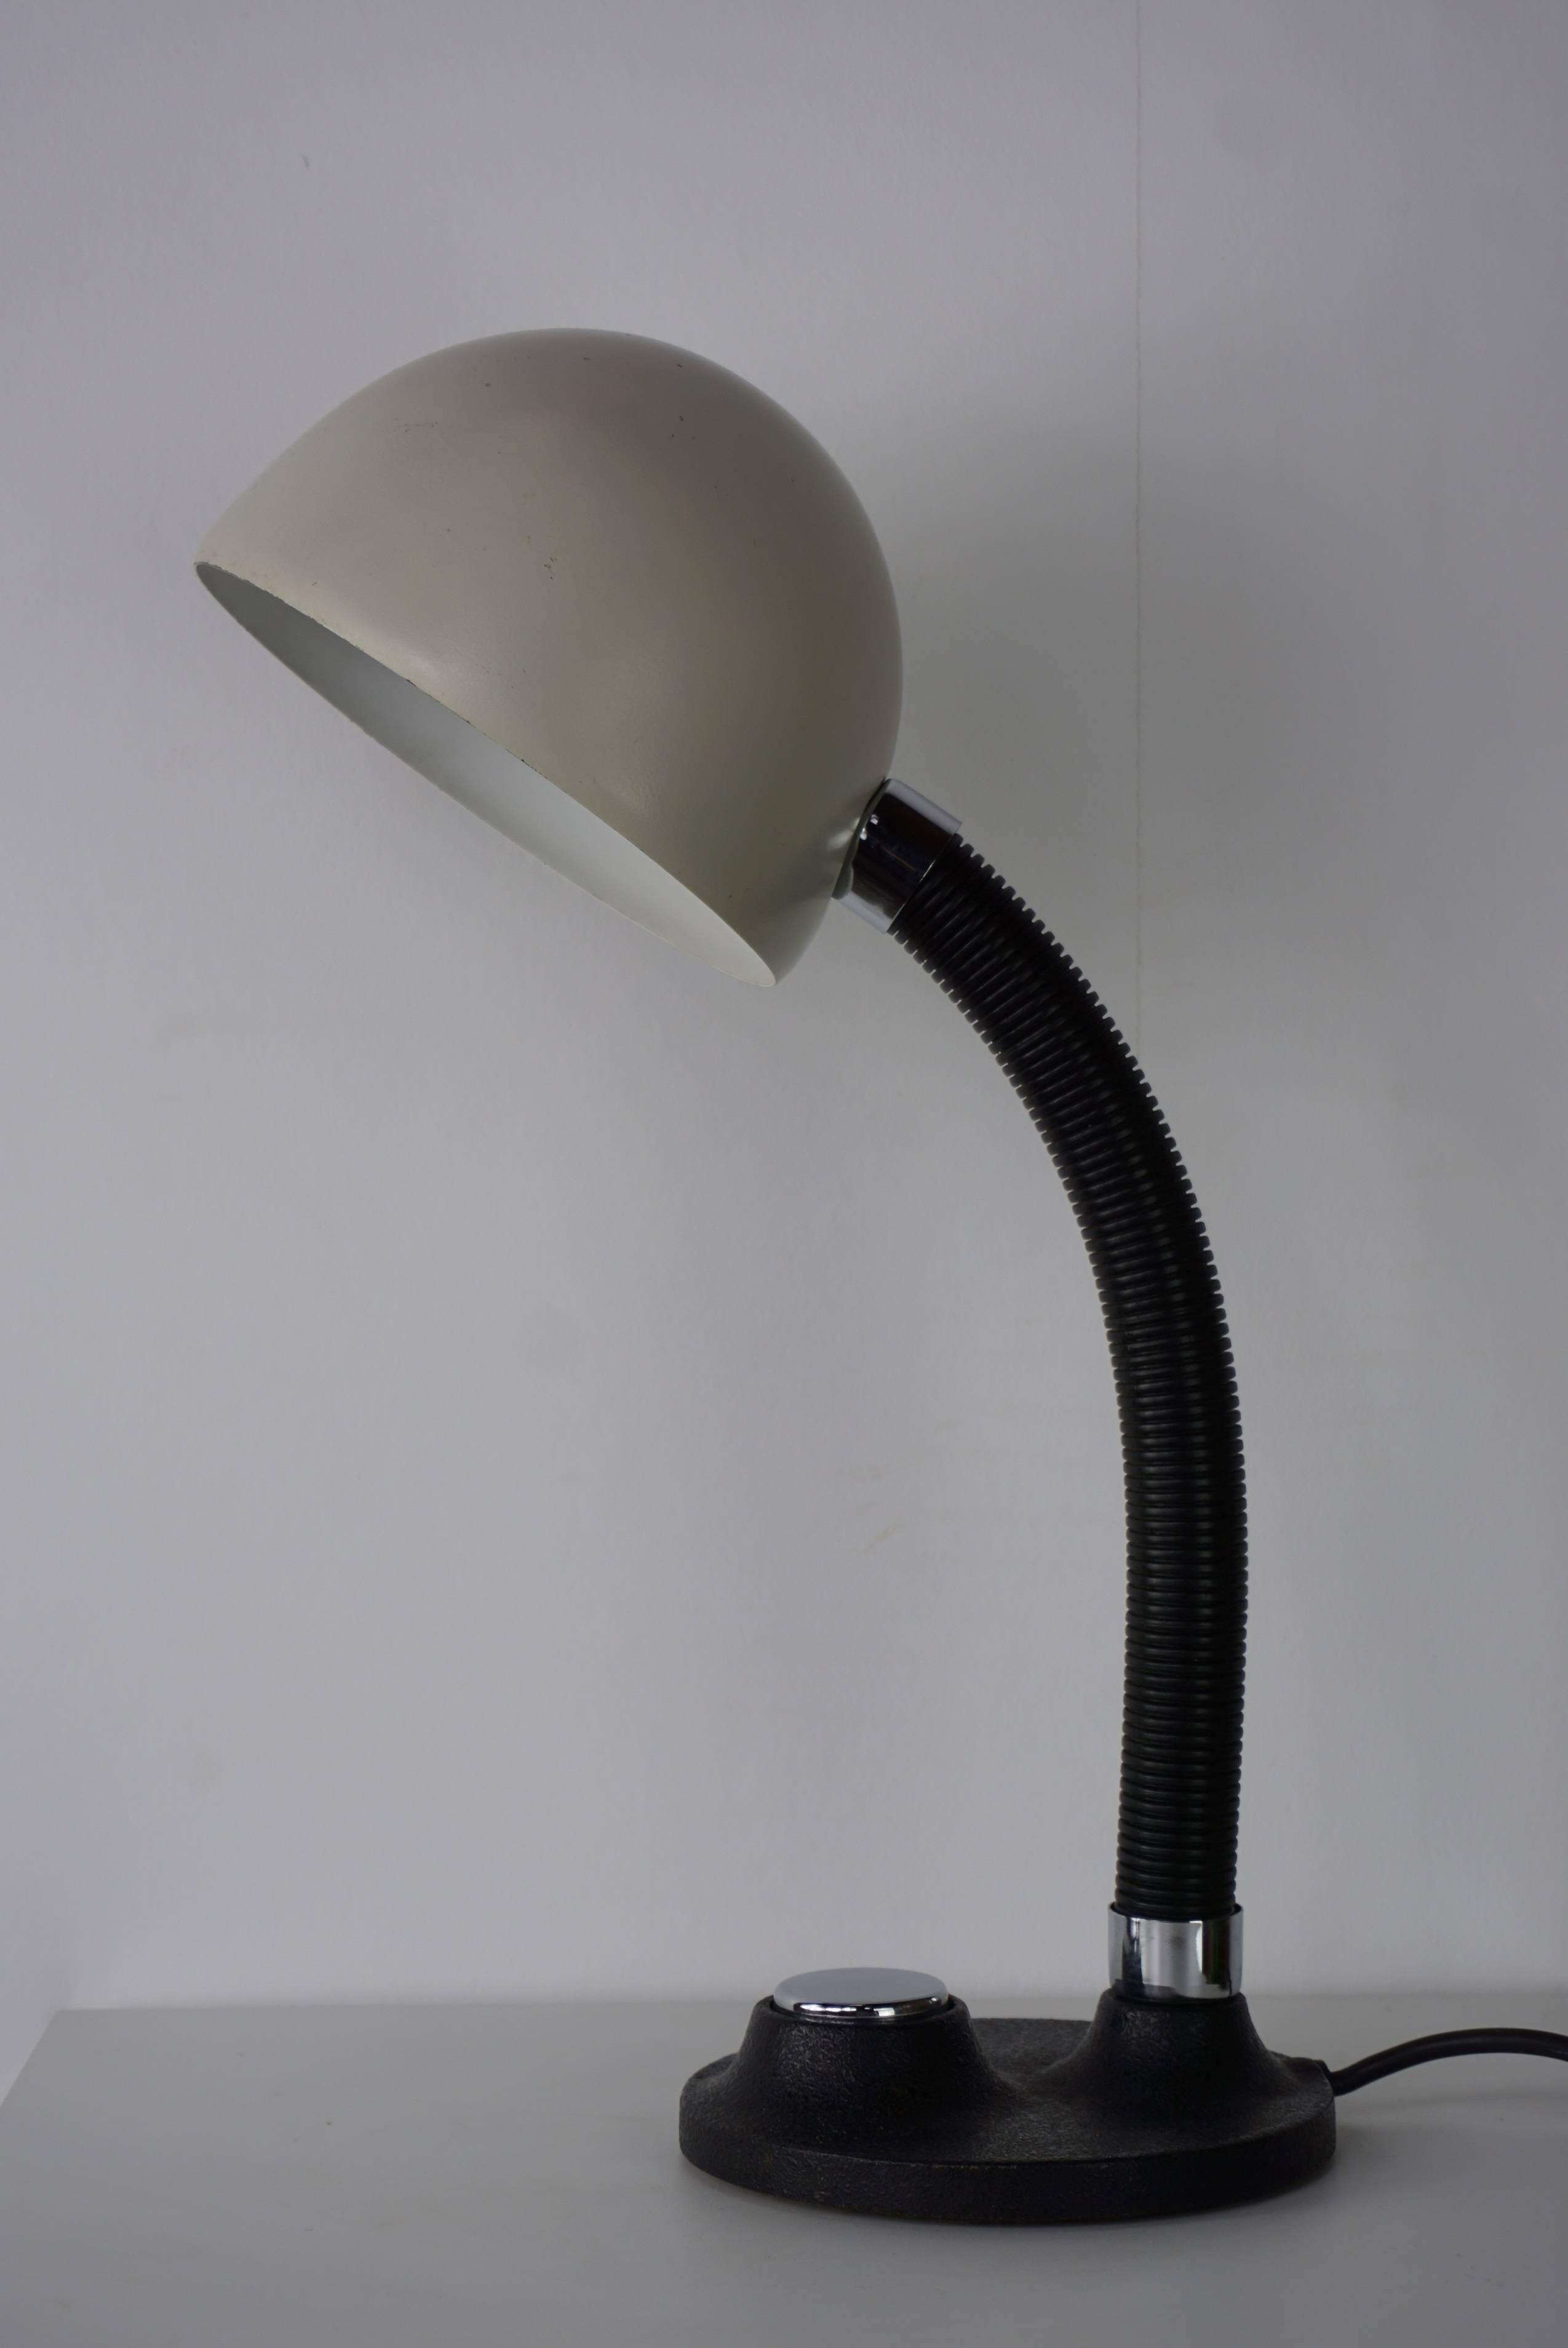 20th Century Bauhaus and Industrial Design Lamp by Hillebrand